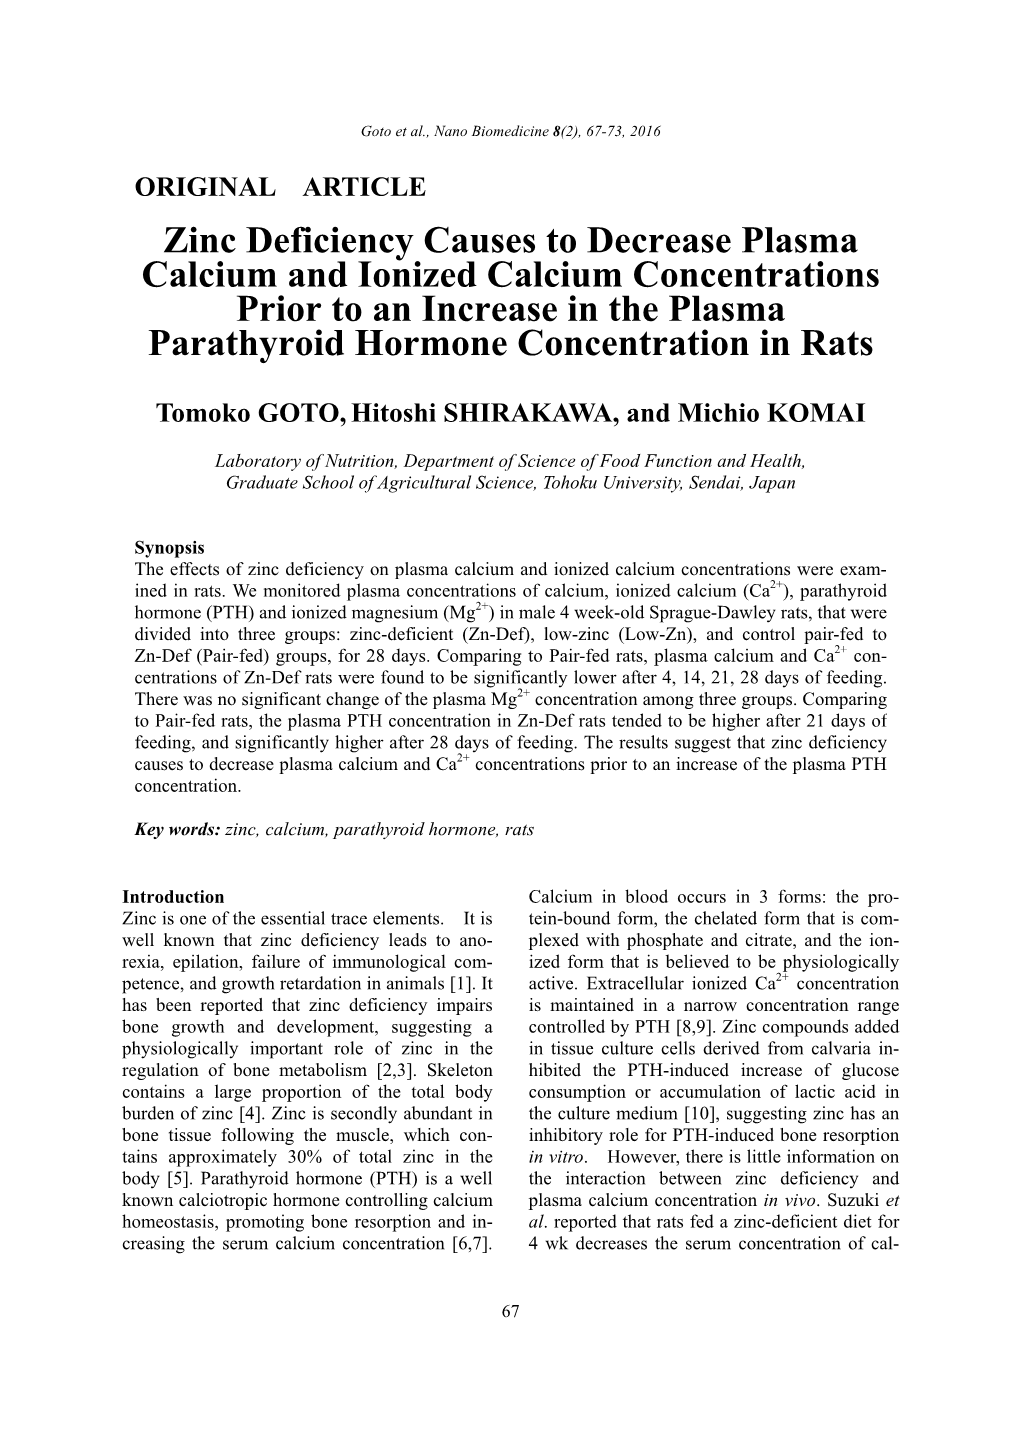 Zinc Deficiency Causes to Decrease Plasma Calcium and Ionized Calcium Concentrations Prior to an Increase in the Plasma Parathyroid Hormone Concentration in Rats